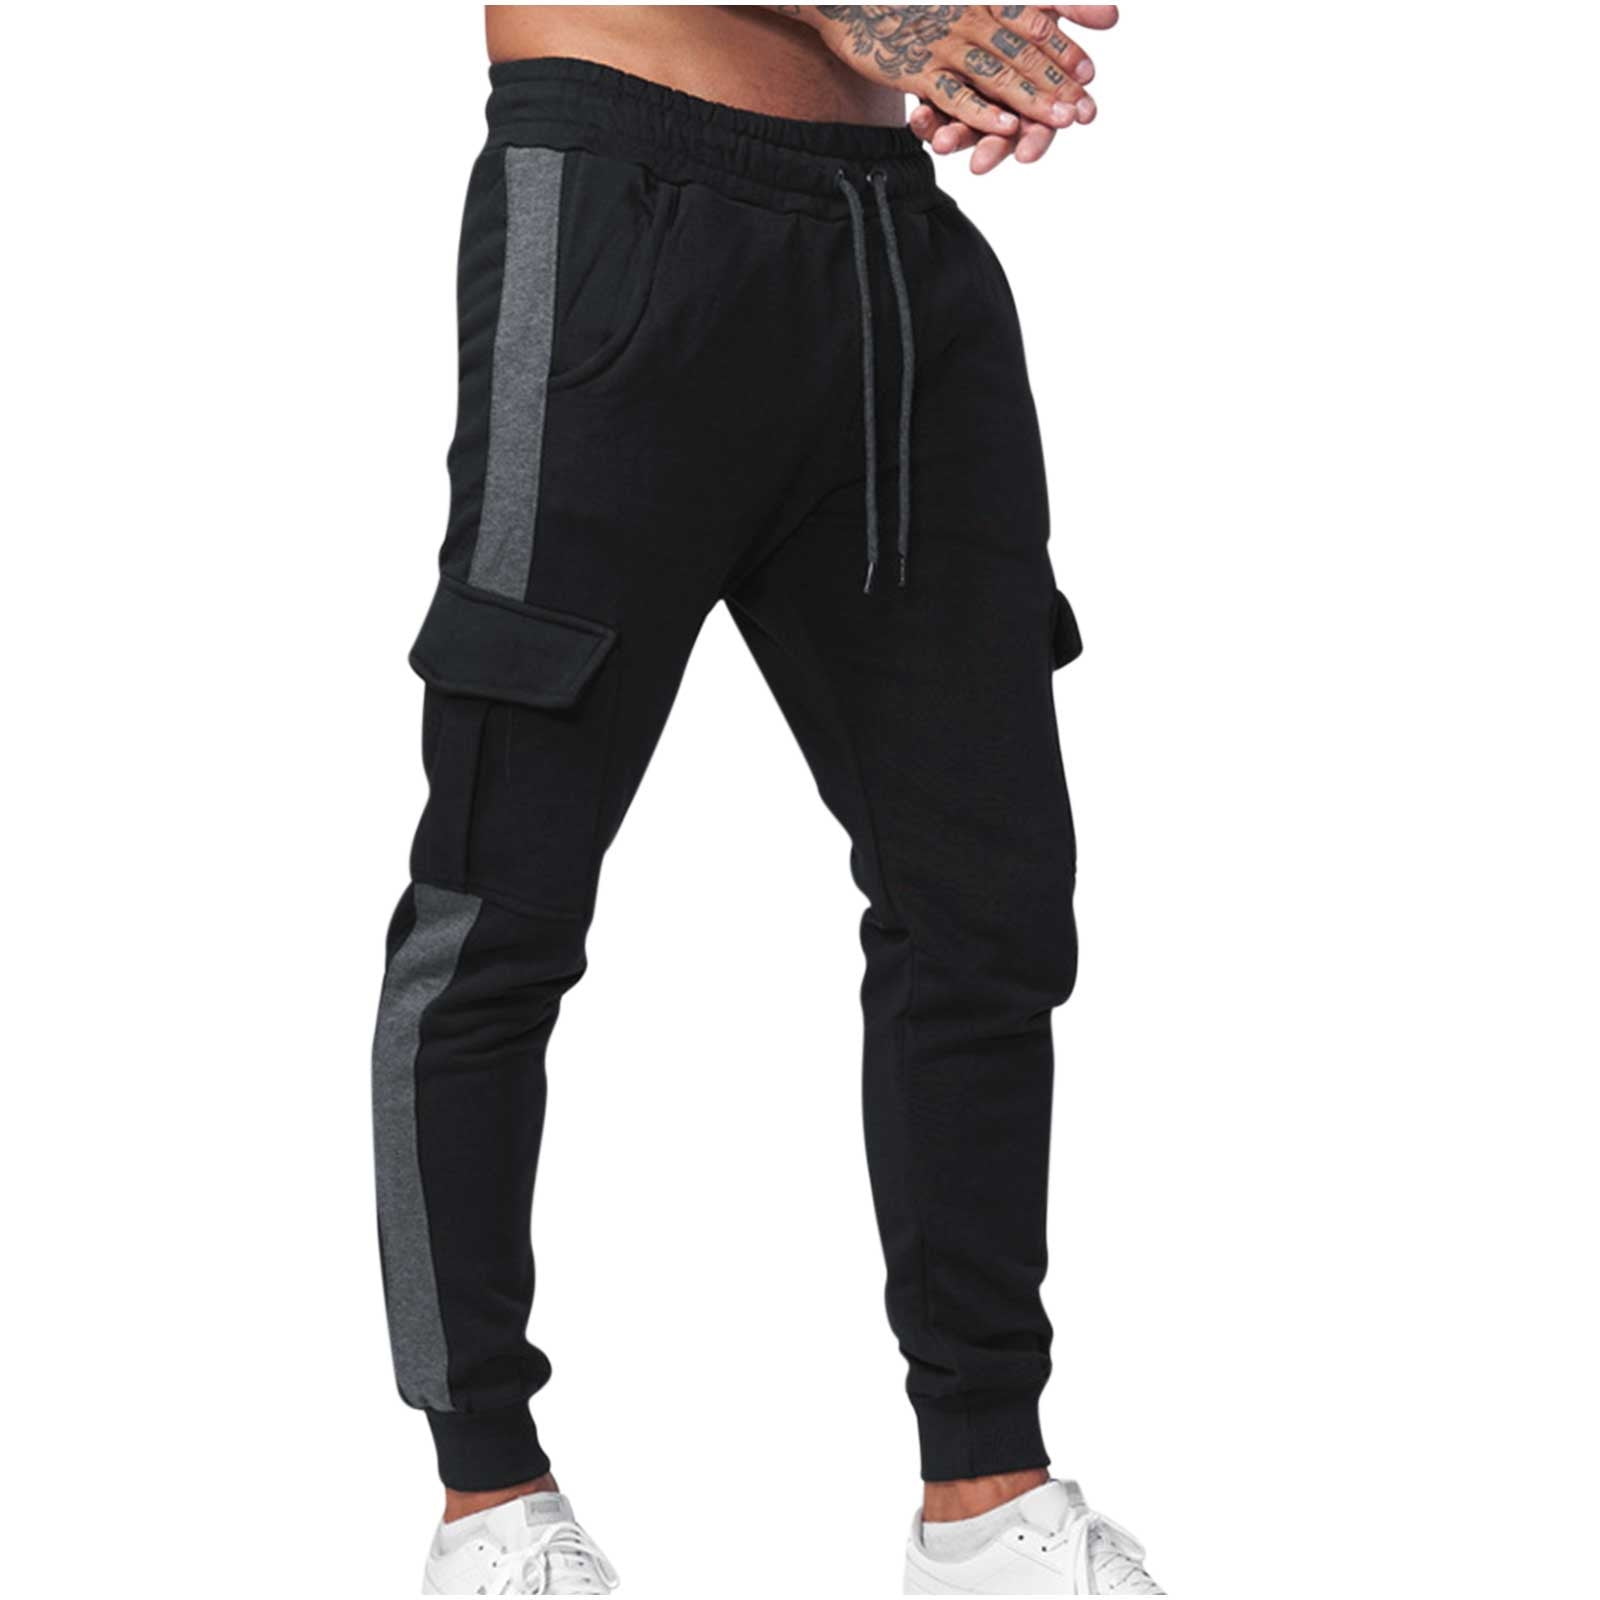 Xysaqa Men's 2 Piece Sweatsuit Outfits Casual Long Sleeve Crewneck Pullover  Top and Jogging Pants Athletic Suit Sports Comfy Tracksuit M-3XL 